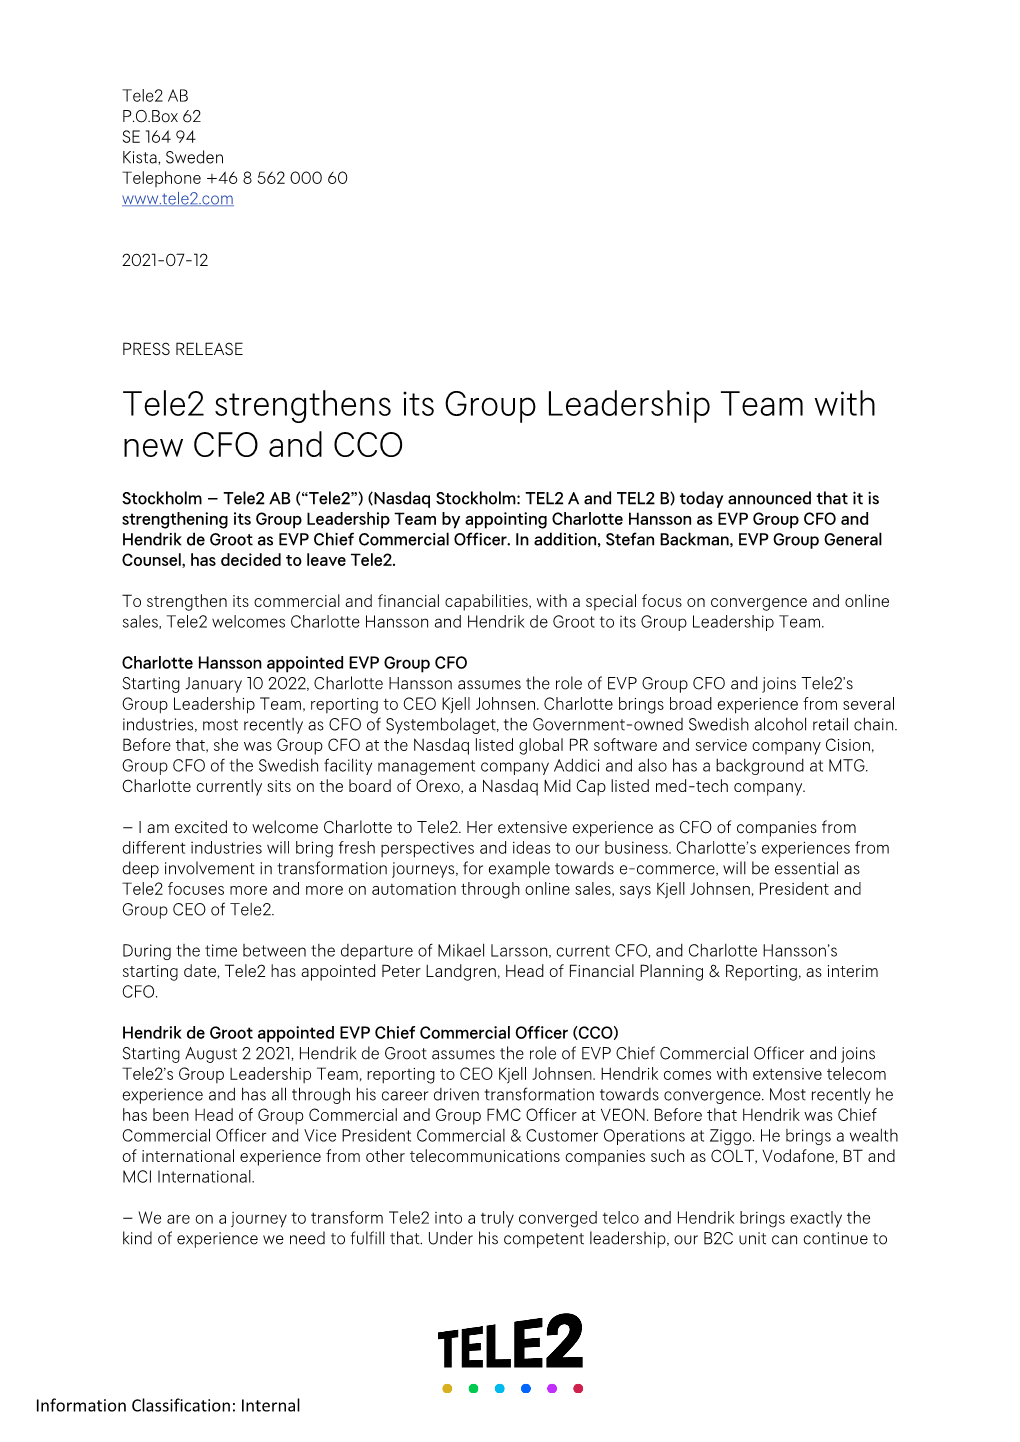 Tele2 Strengthens Its Group Leadership Team with New CFO and CCO